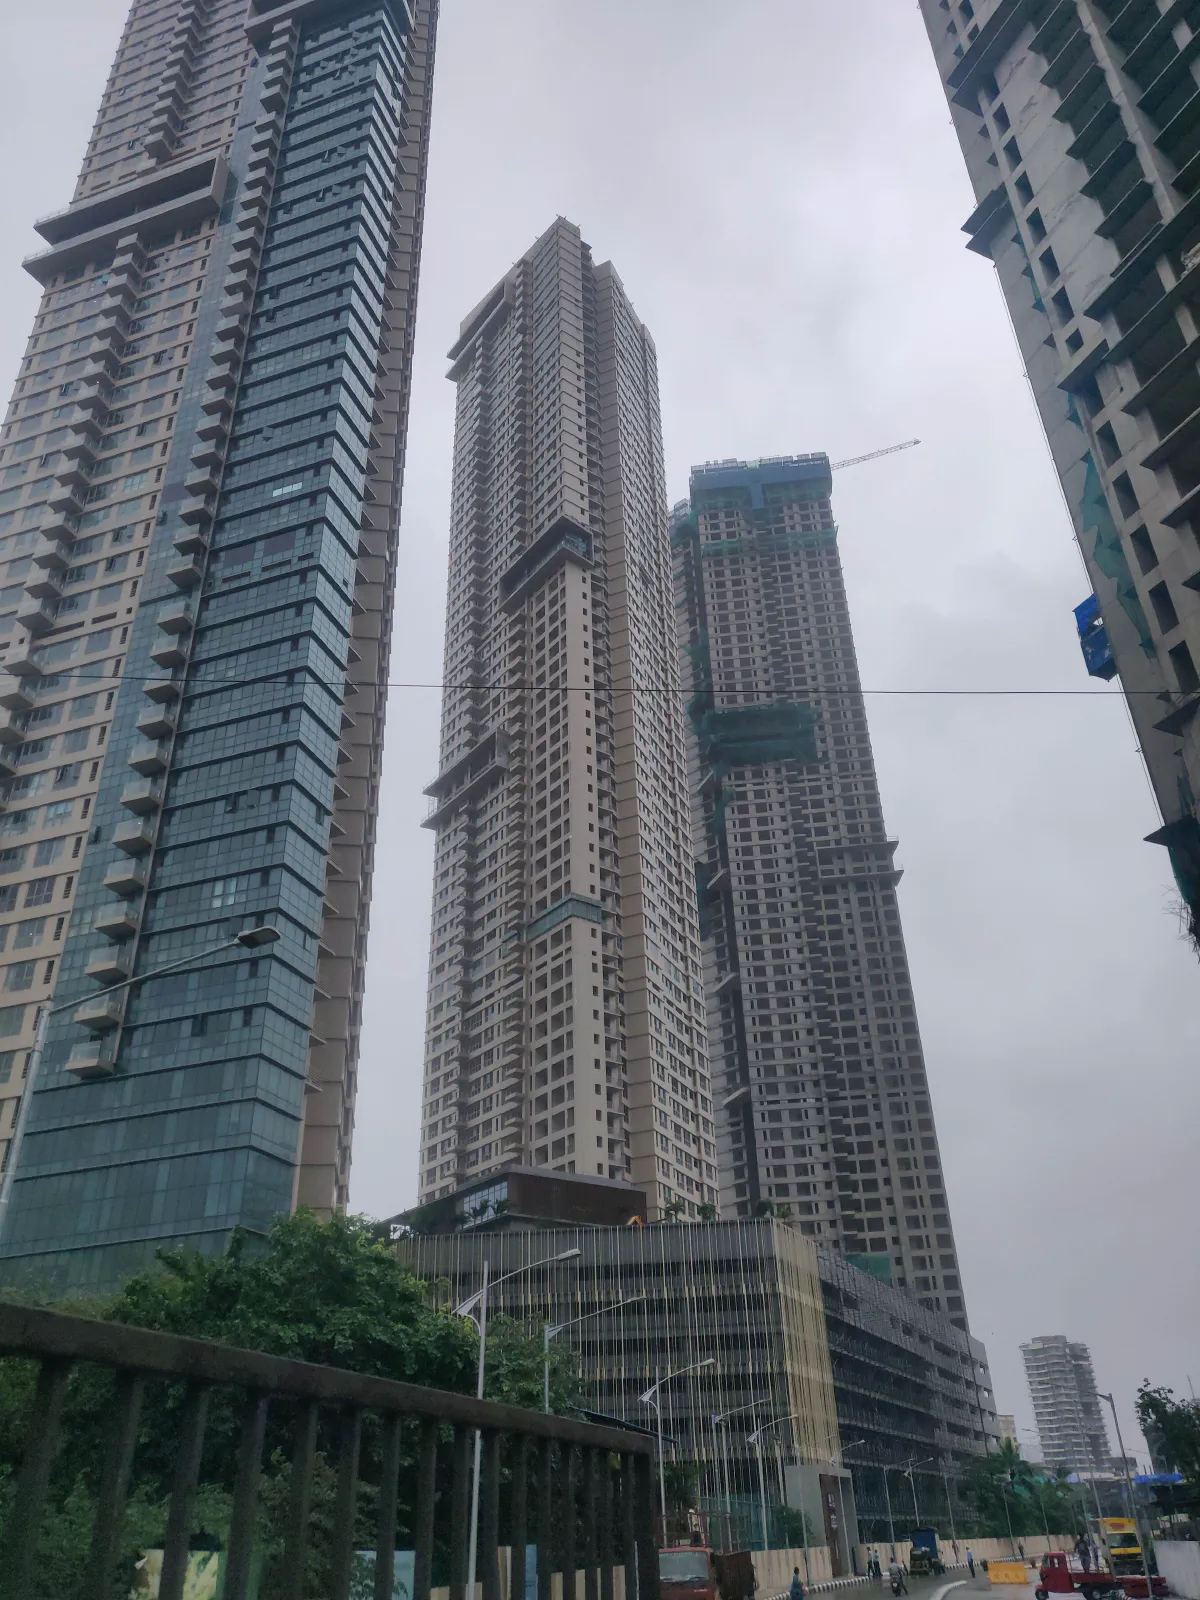 Three tall towers under construction.